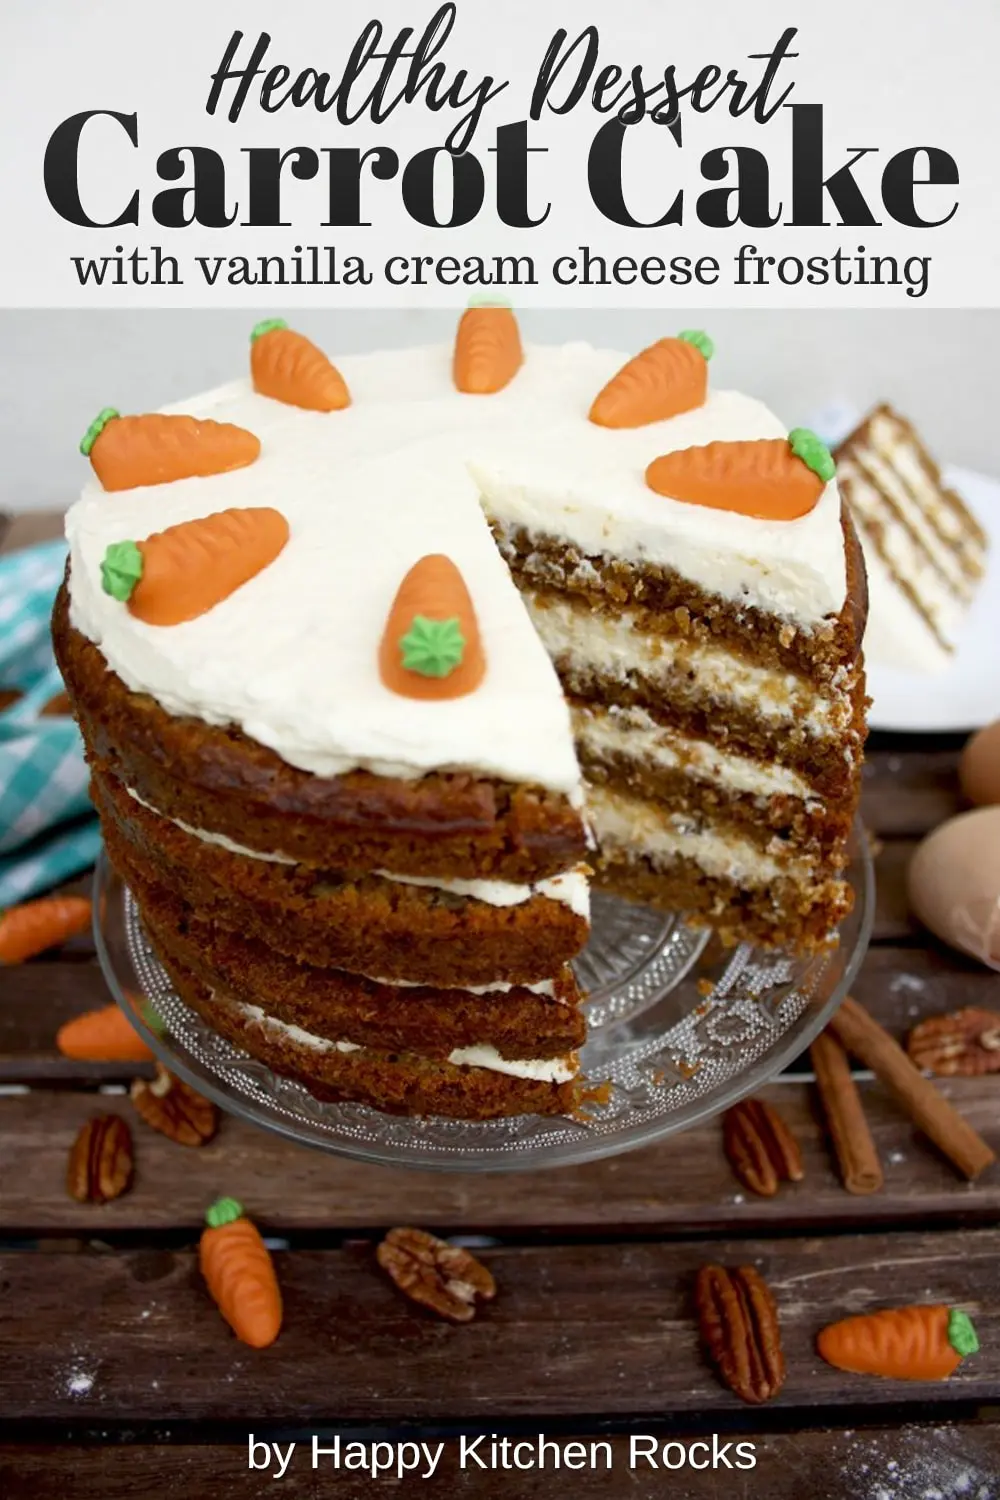 Super Moist Carrot Cake with Vanilla Cream Cheese Frosting Another Collage with Text Overlay